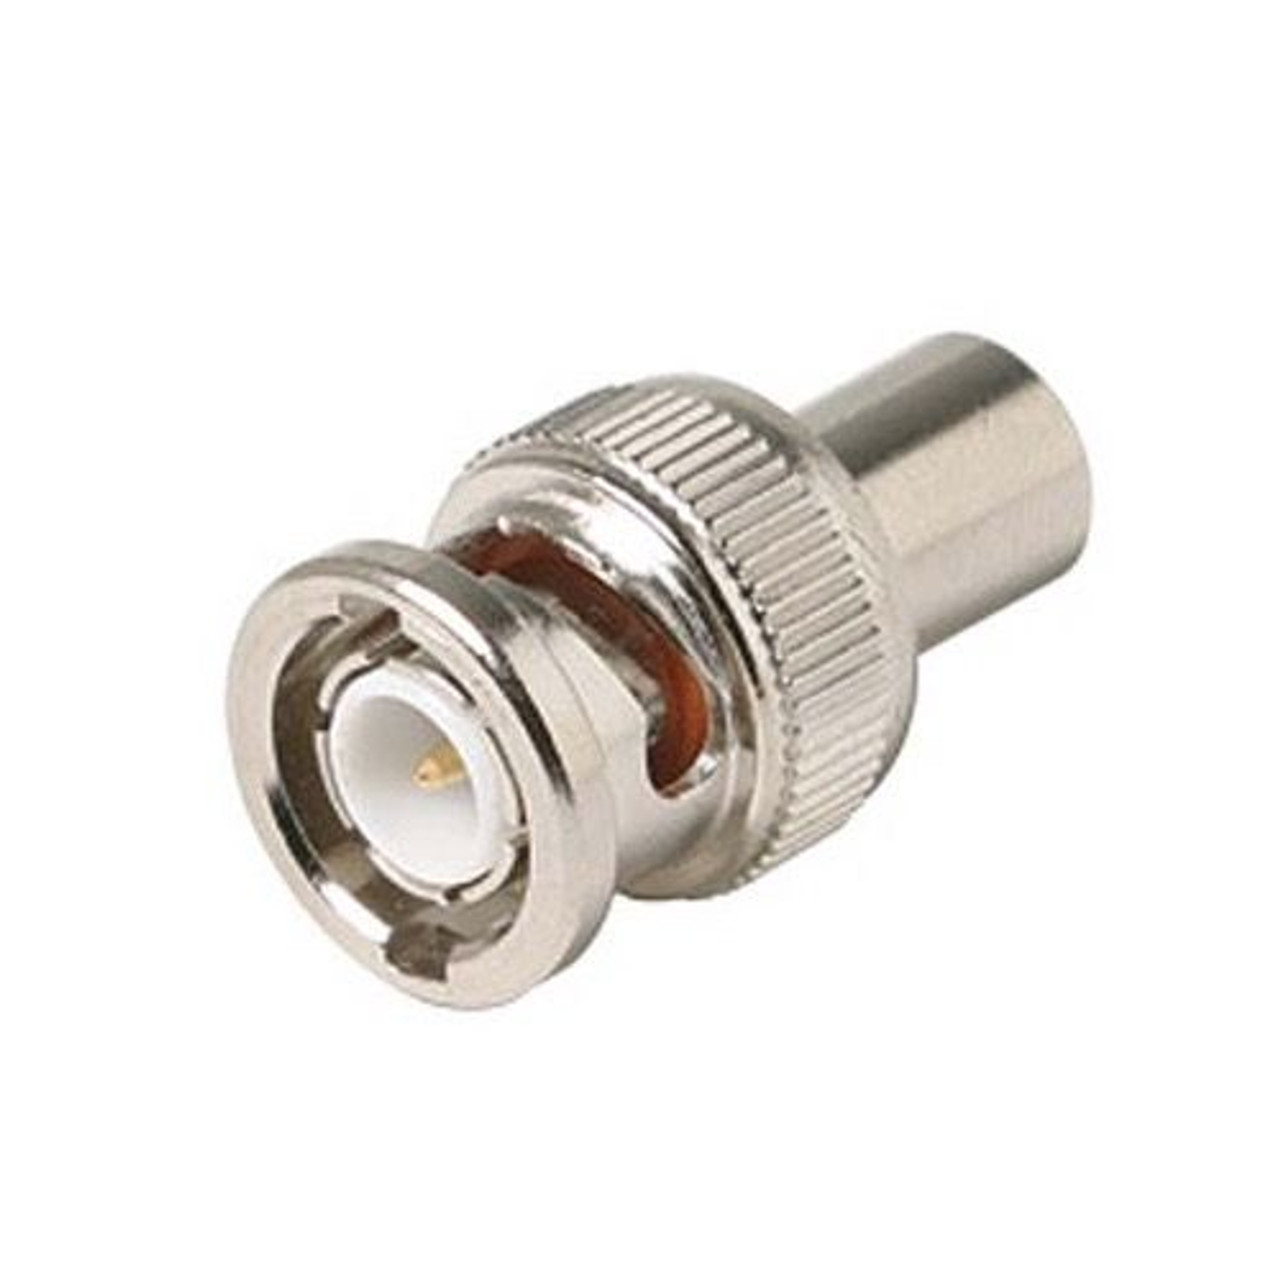 Vanco BNC Terminator 50 Ohm Plug 5% Adapter 1/2 Watt End Commercial Grade Connector for Video and Headend Applications, RF Digital Commercial Audio Video Component